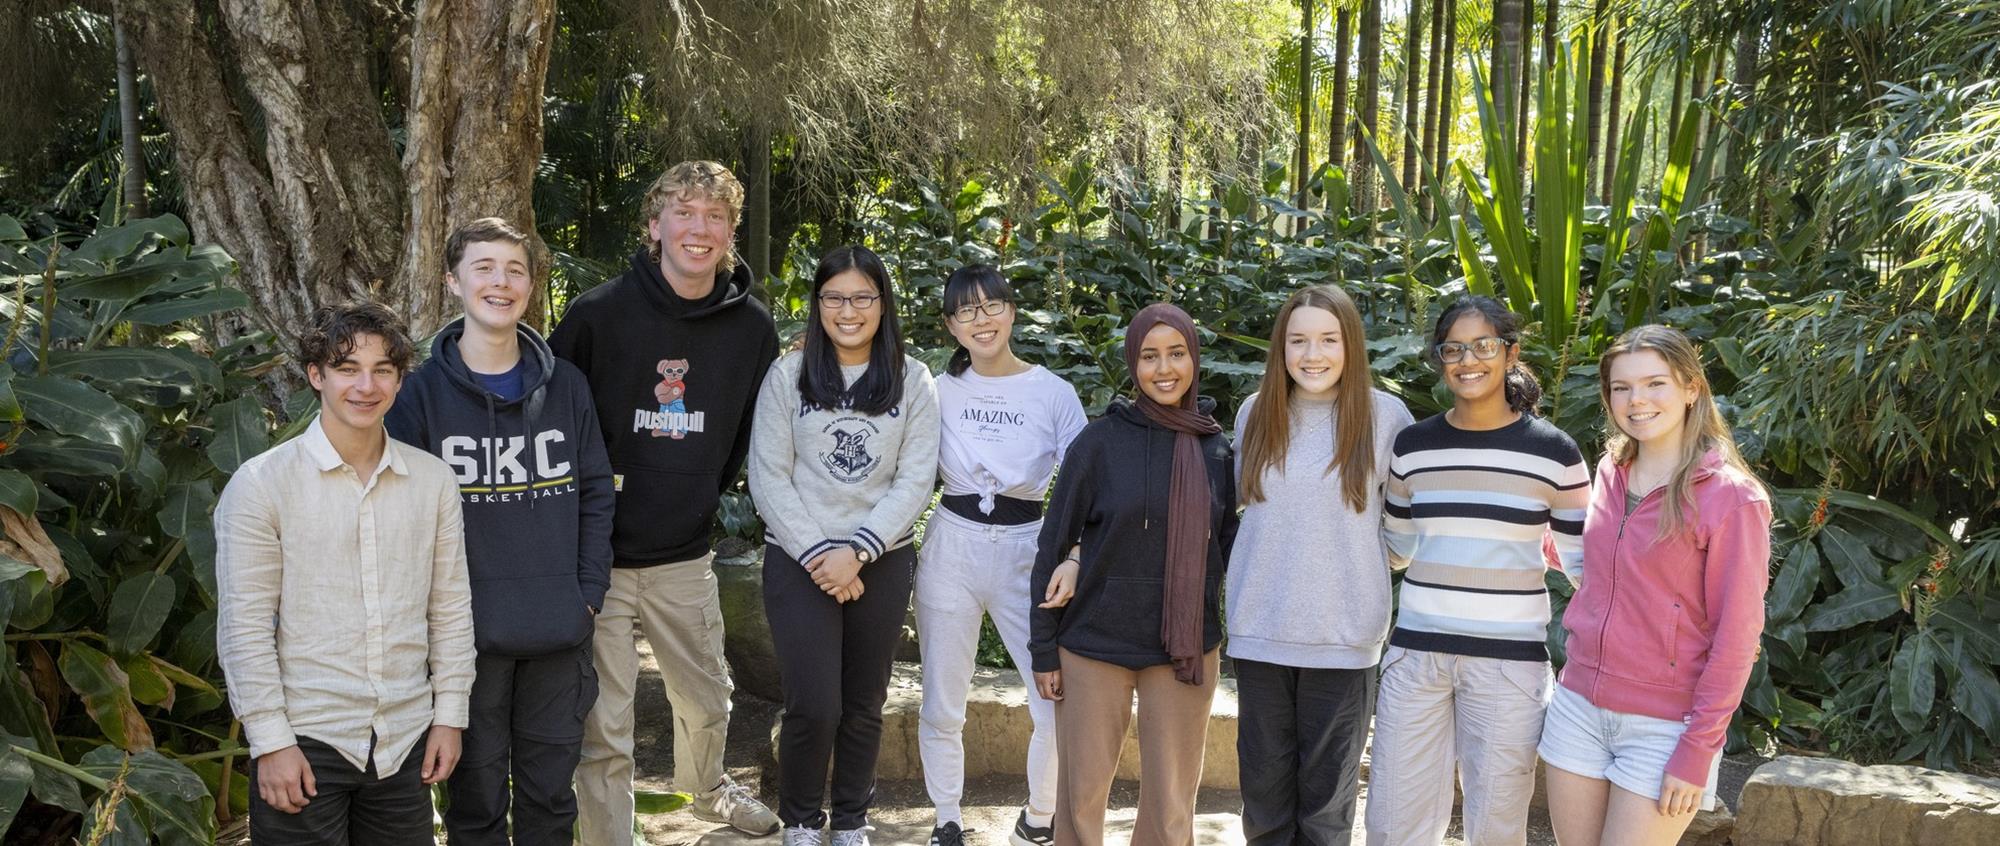 The nine members of Youth Advisory Board, happily posing together at Melbourne Zoo.